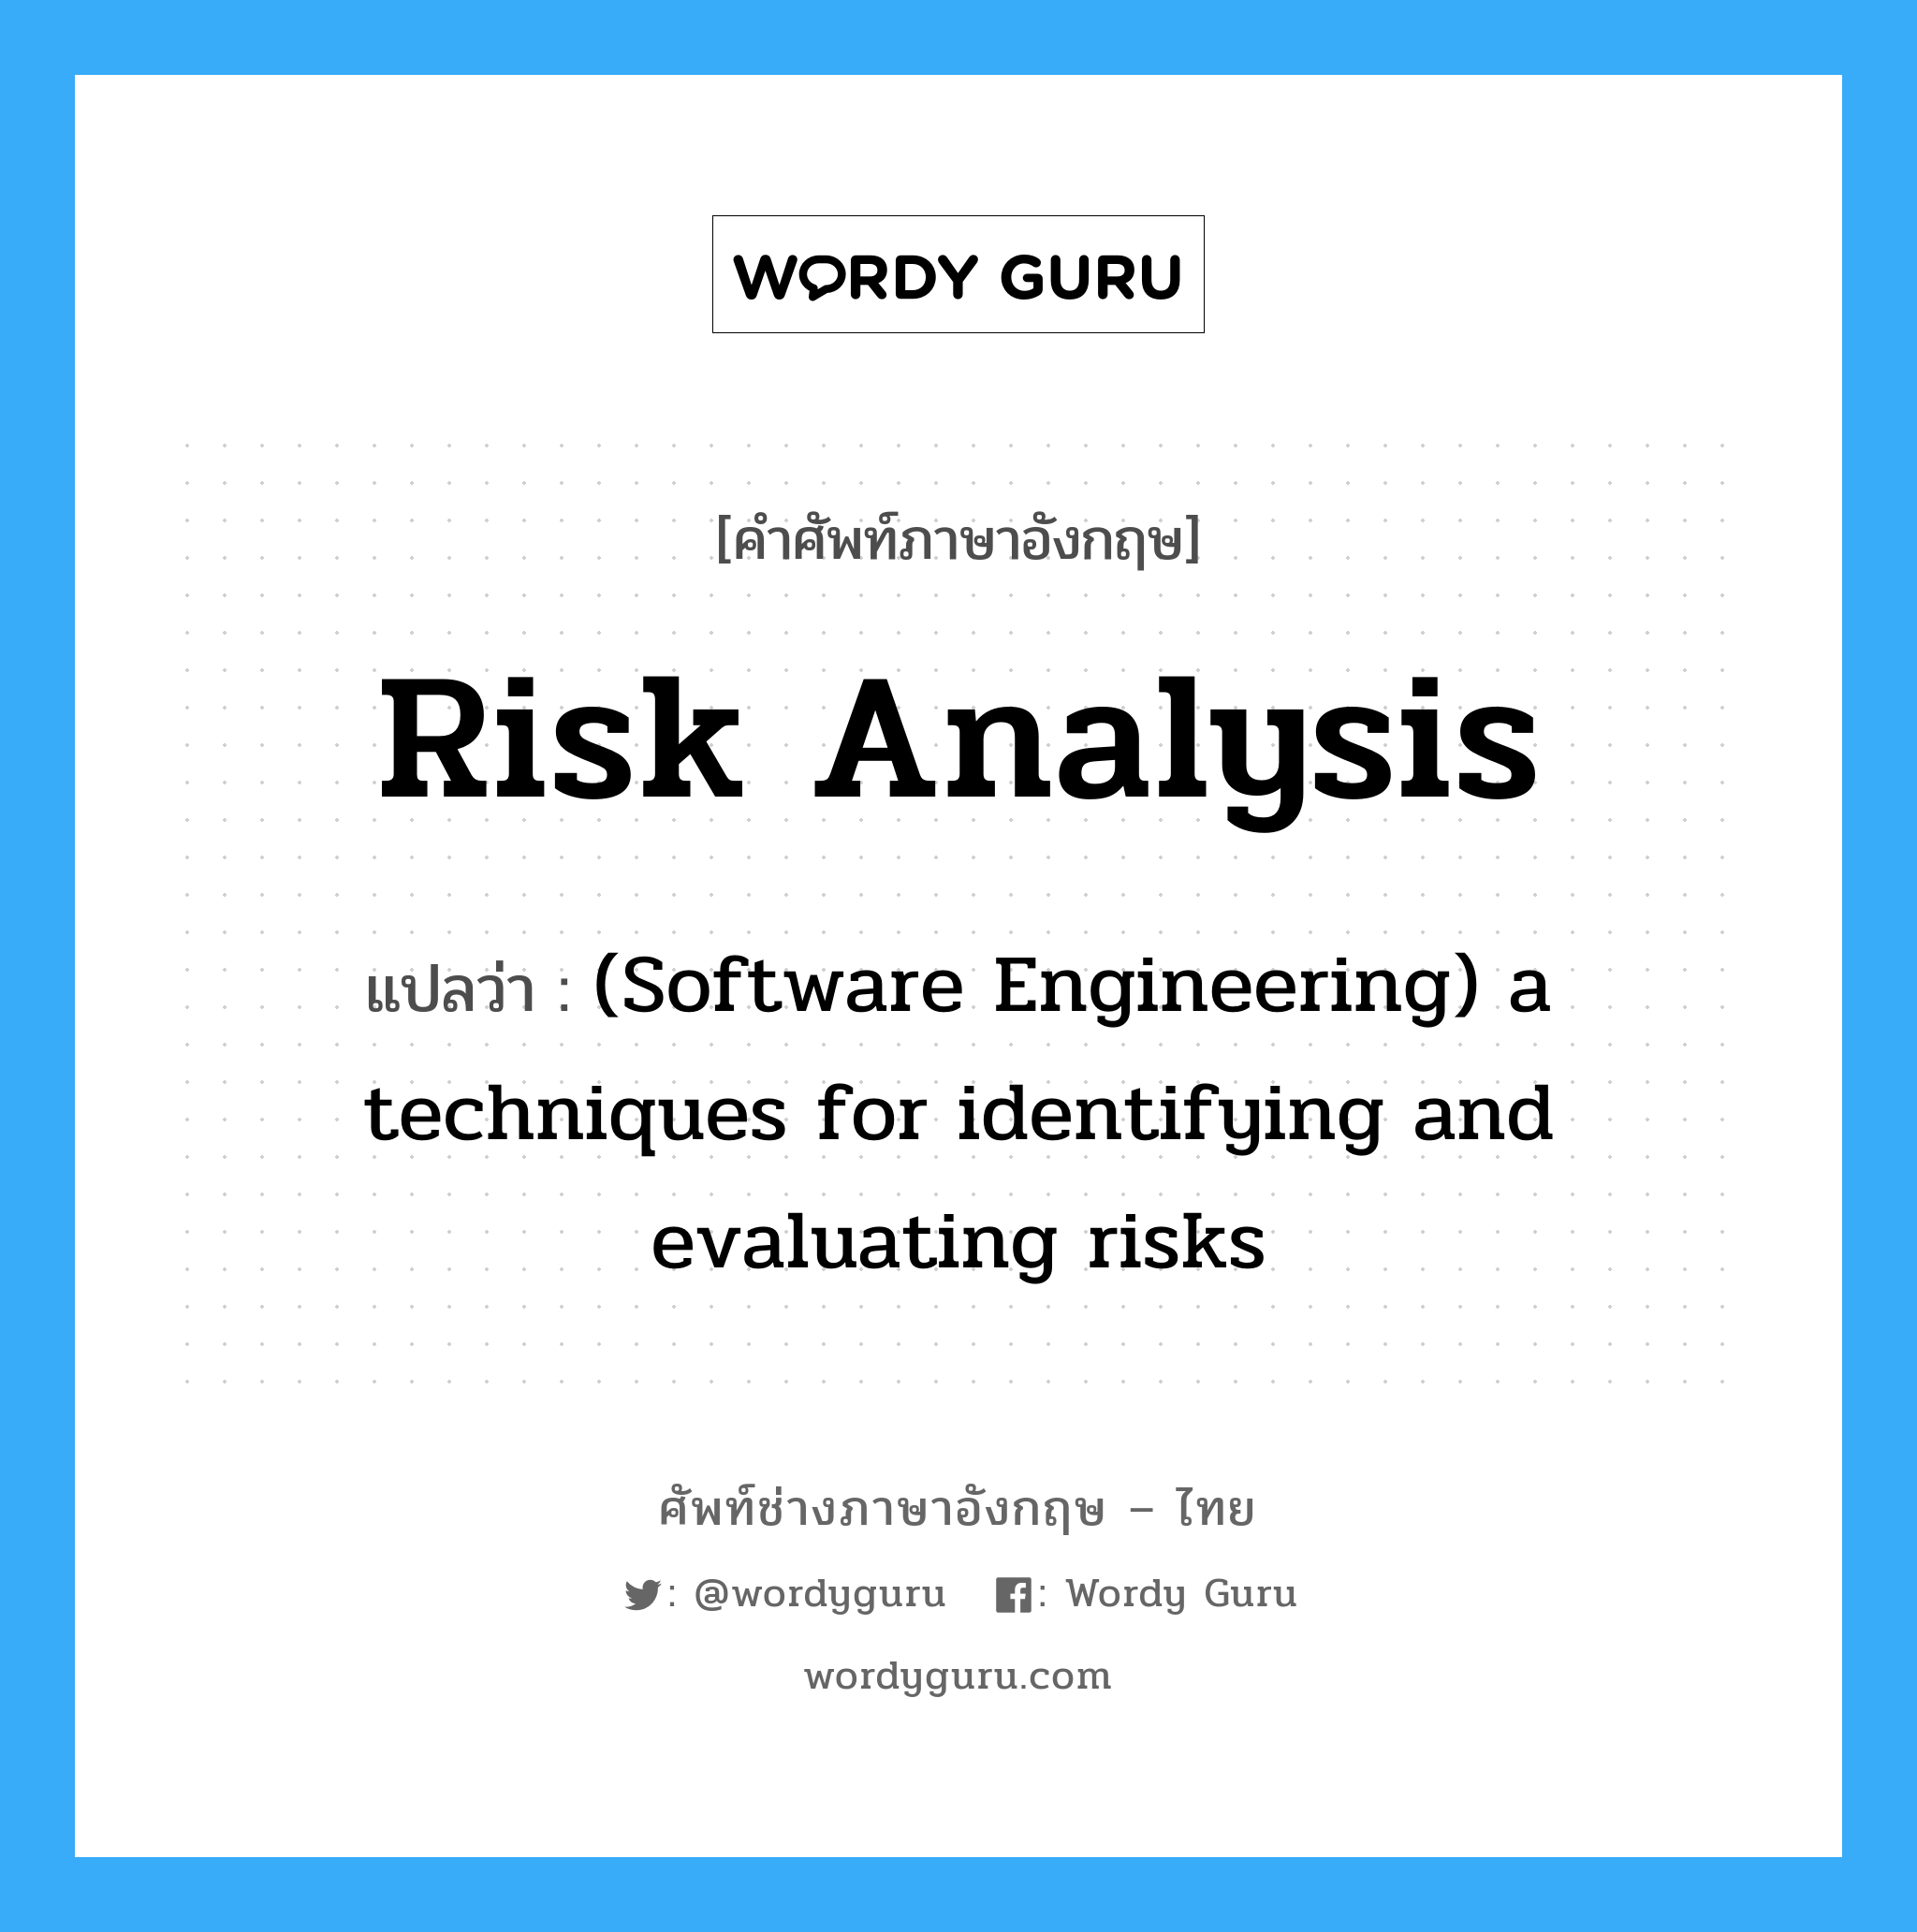 Risk analysis แปลว่า?, คำศัพท์ช่างภาษาอังกฤษ - ไทย Risk analysis คำศัพท์ภาษาอังกฤษ Risk analysis แปลว่า (Software Engineering) a techniques for identifying and evaluating risks